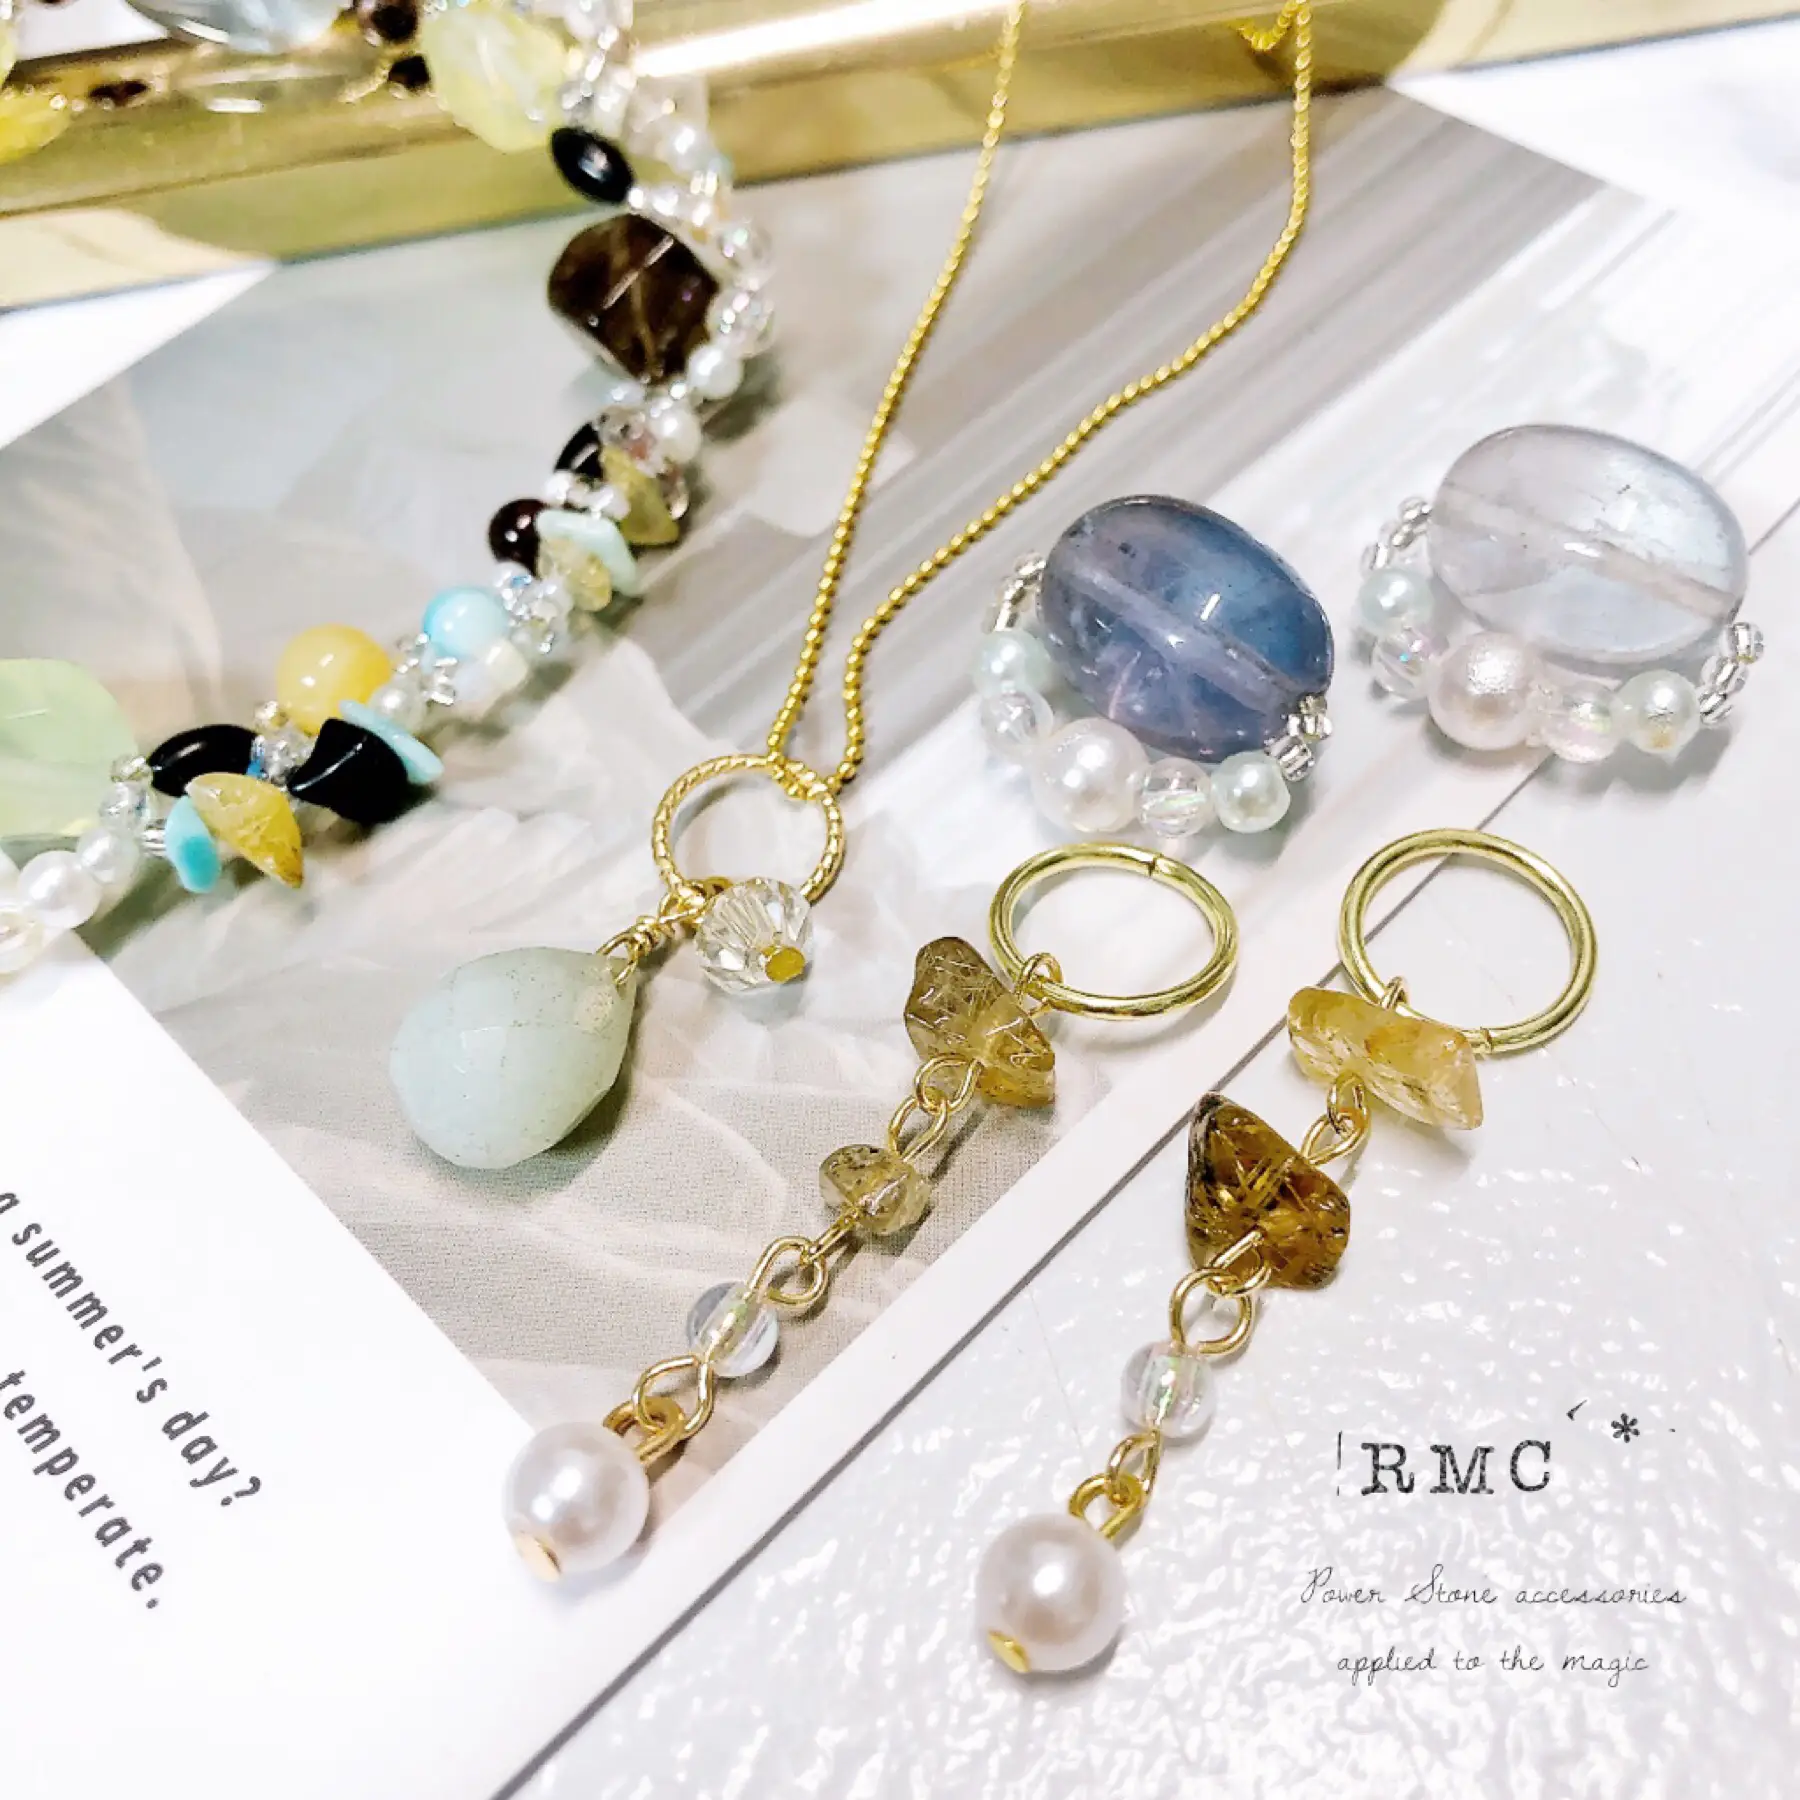 Today's Order Natural Stone Accessories✨ | Gallery posted by RMC